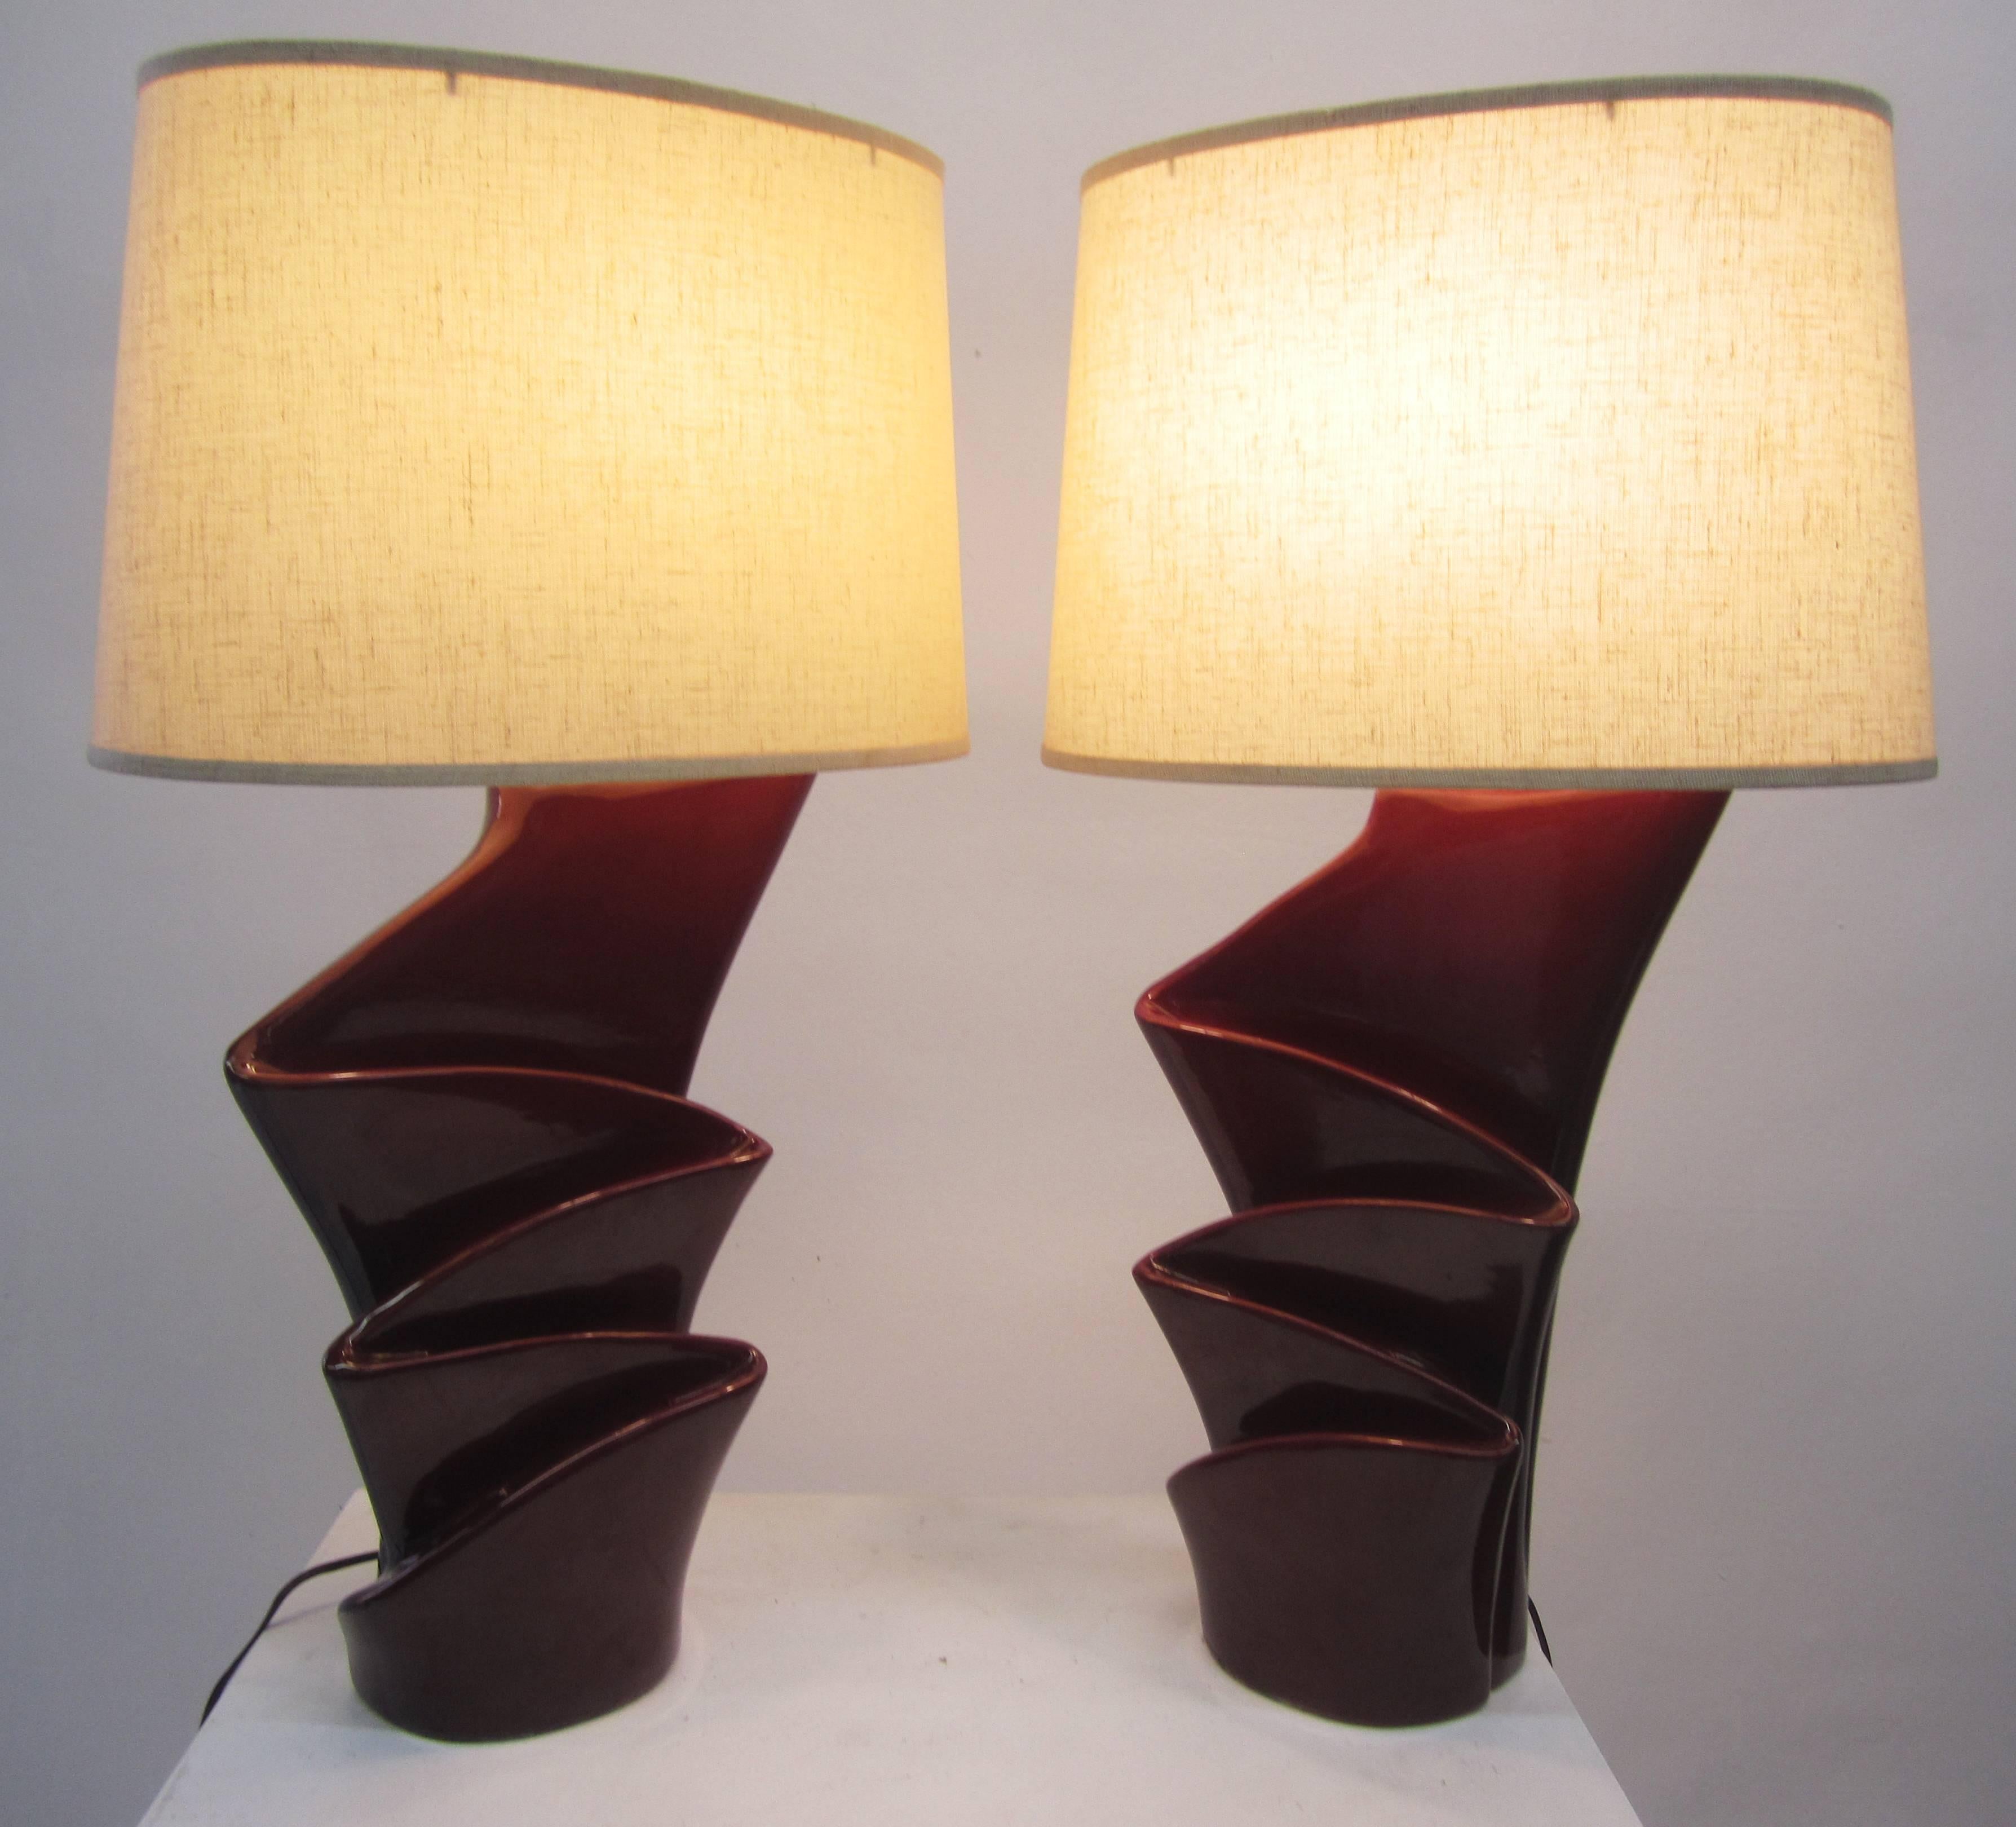 Glazed Red Ceramic Curtain Lamps, a Pair